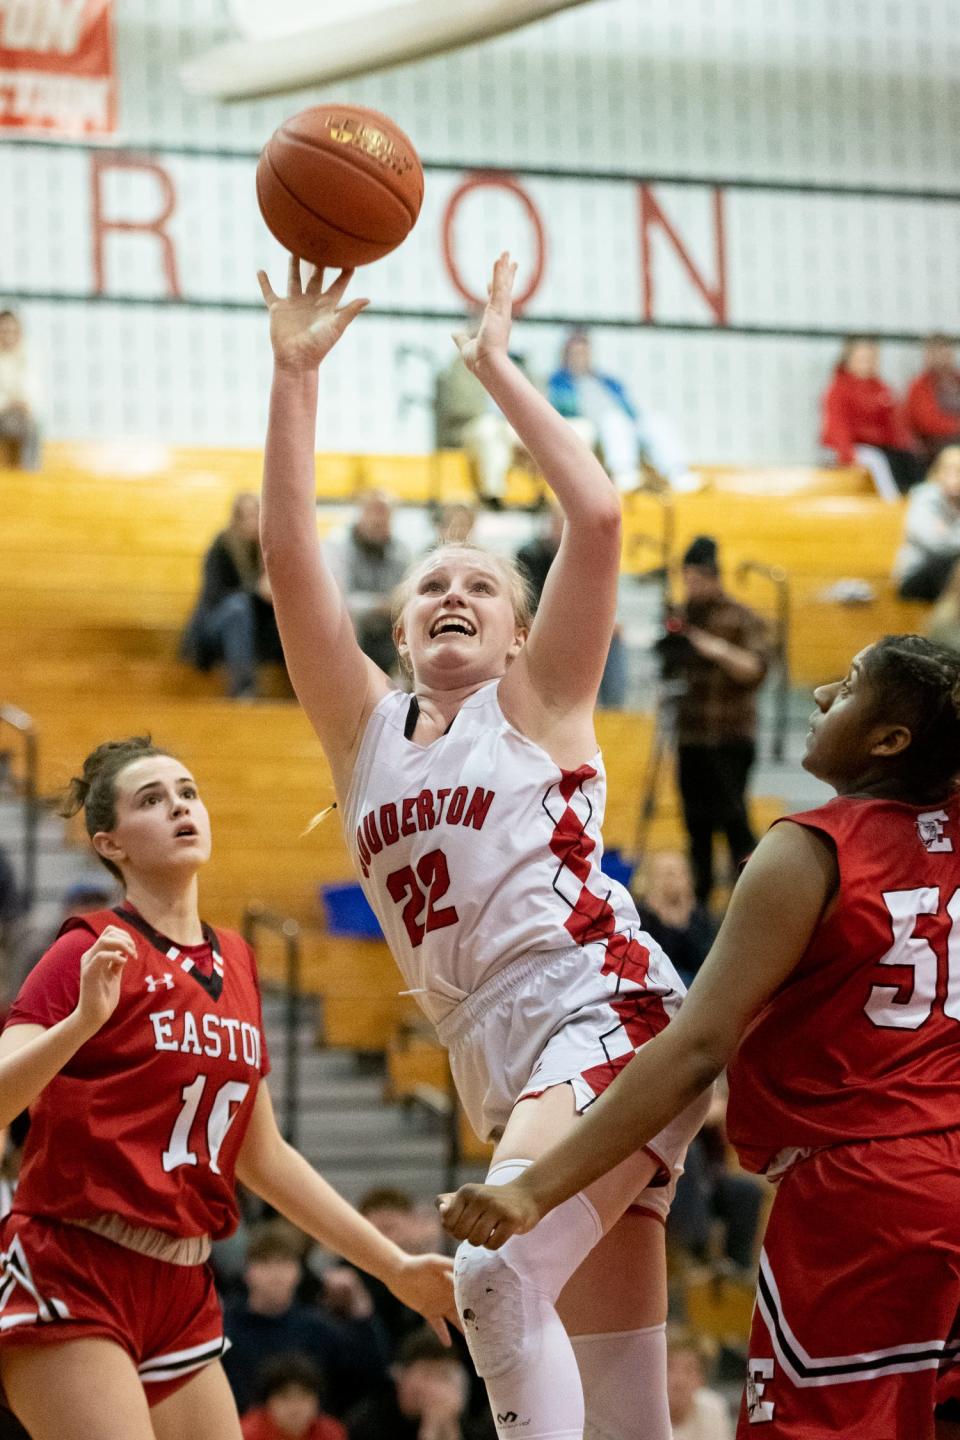 Souderton's Teya McConnaha, center, shoots while covered by Easton's Evalyse Cole, left, and Anye Staton in a PIAA 6A first round state playoff game against Easton, on Tuesday, March 8, 2022, at Souderton High School. The Red Rovers defeated Big Red 42-36 to advance to the second round.